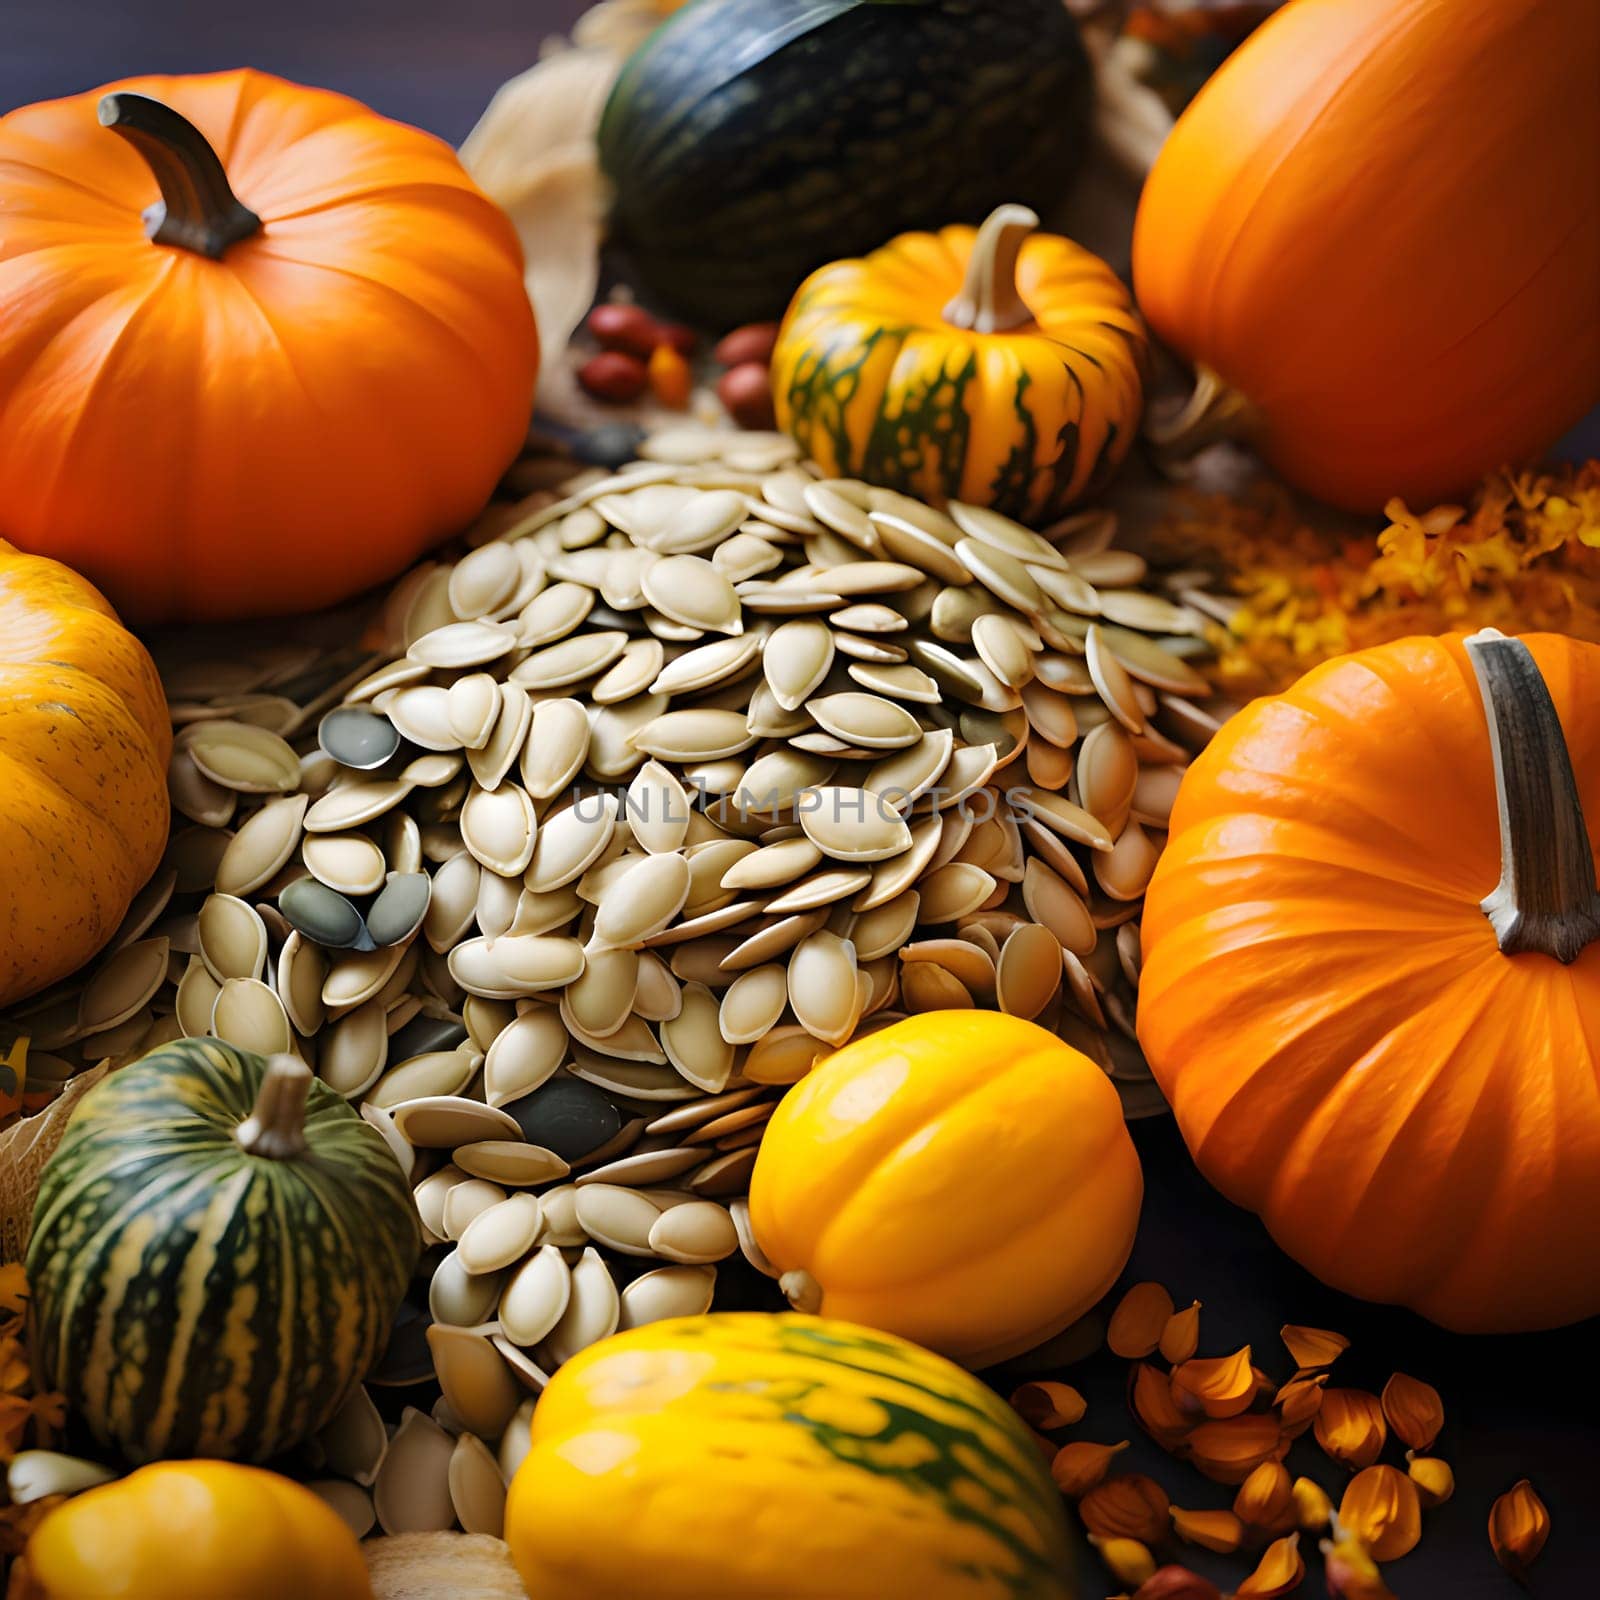 An aerial view of the colorful pumpkins and seeds scattered around. Pumpkin as a dish of thanksgiving for the harvest. The atmosphere of joy and celebration.